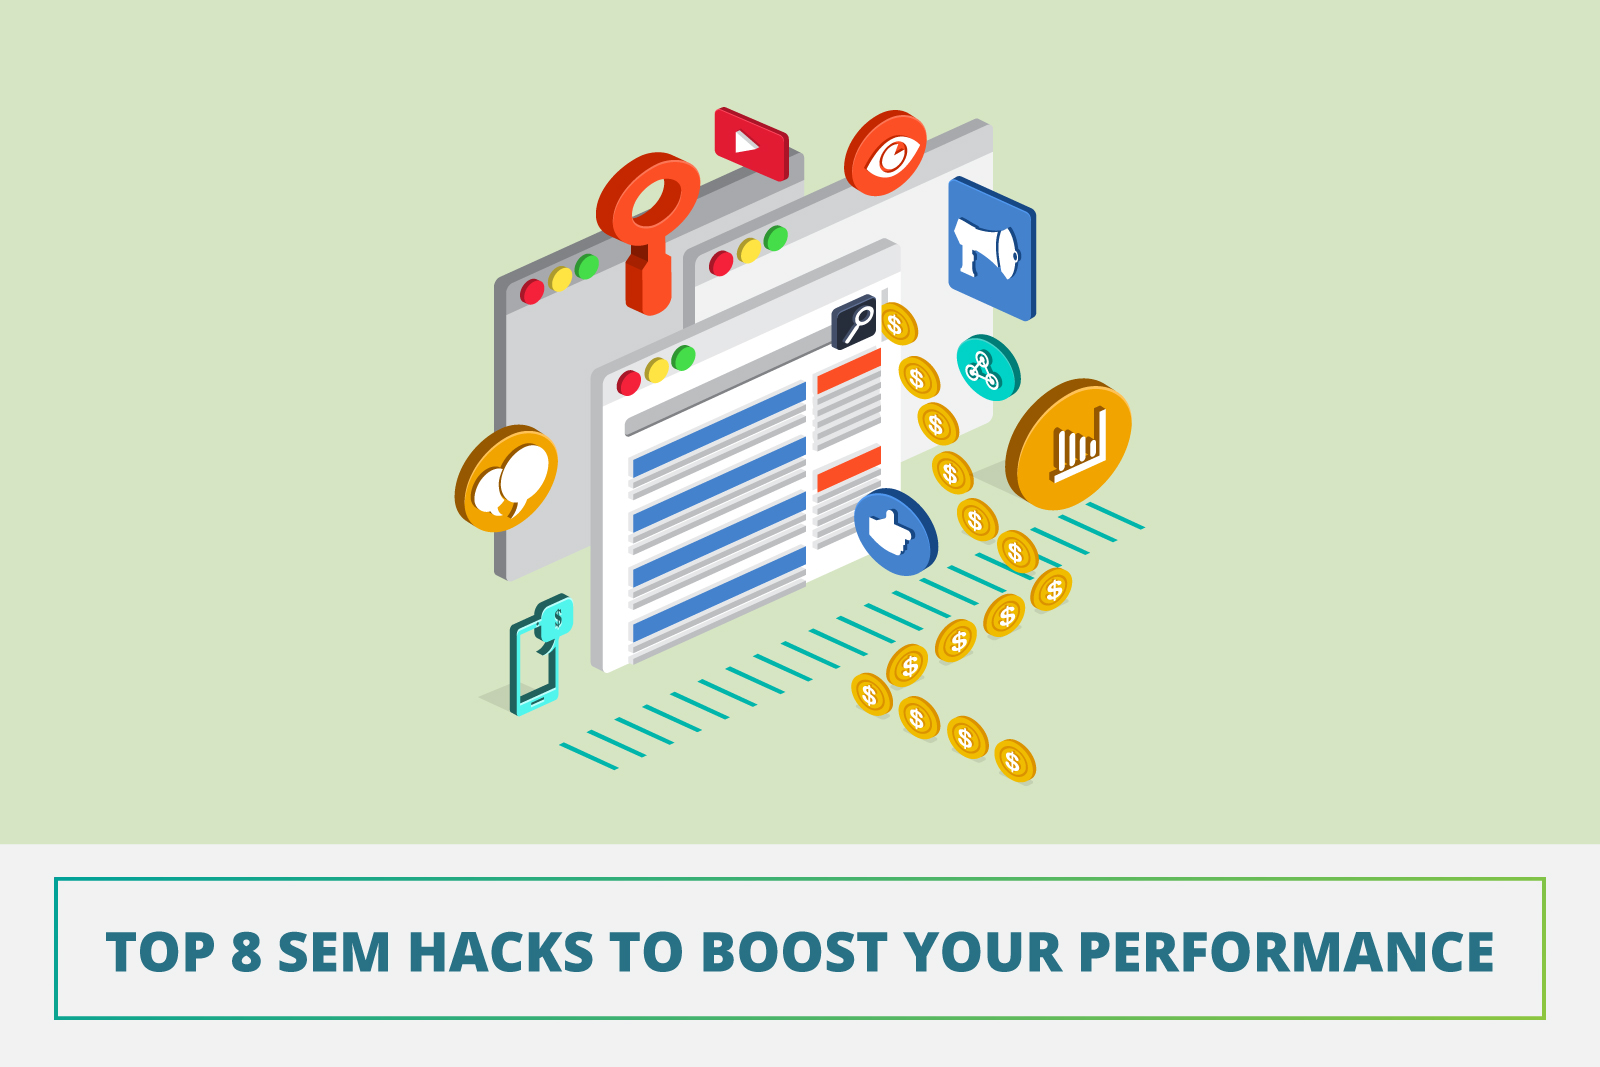 Top 8 SEM Hacks to Boost Your Performance